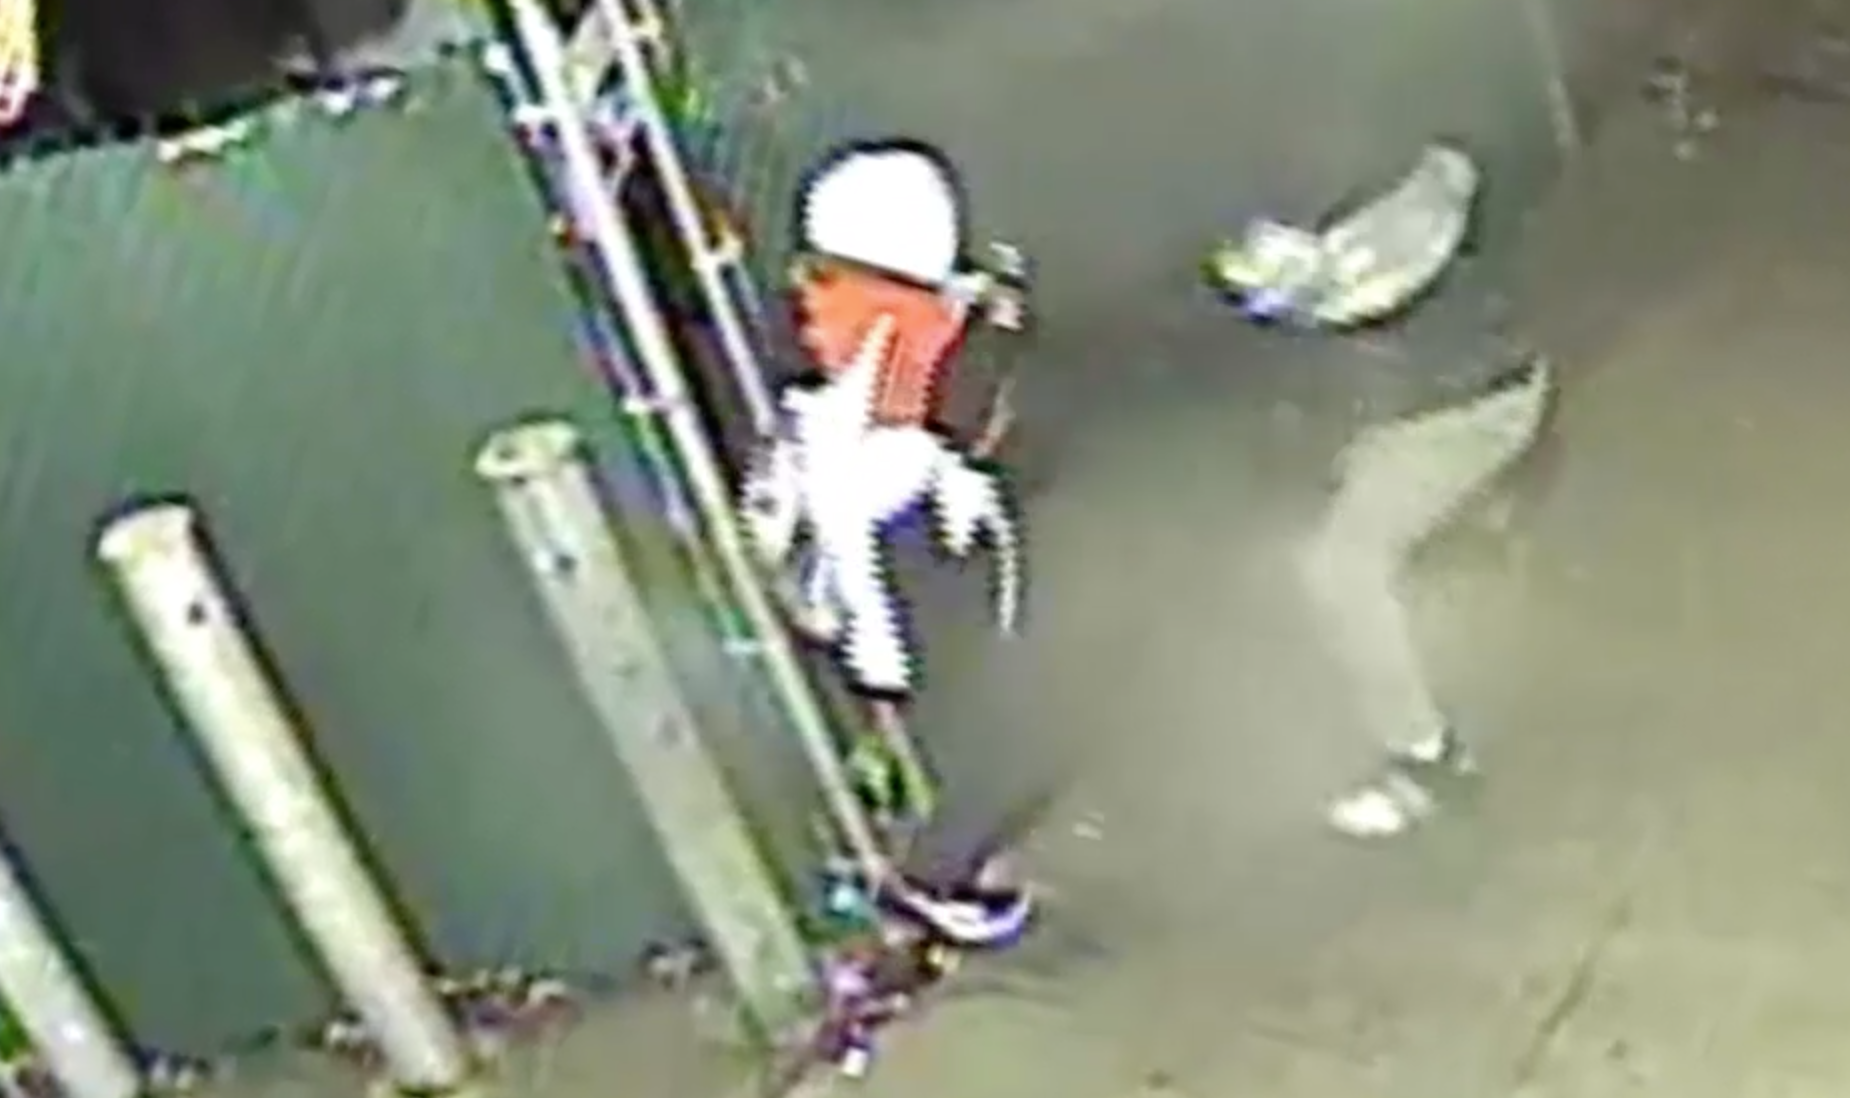 VIDEO: Man Snatches 12-Year-Old’s iPhone in Sheepshead Bay